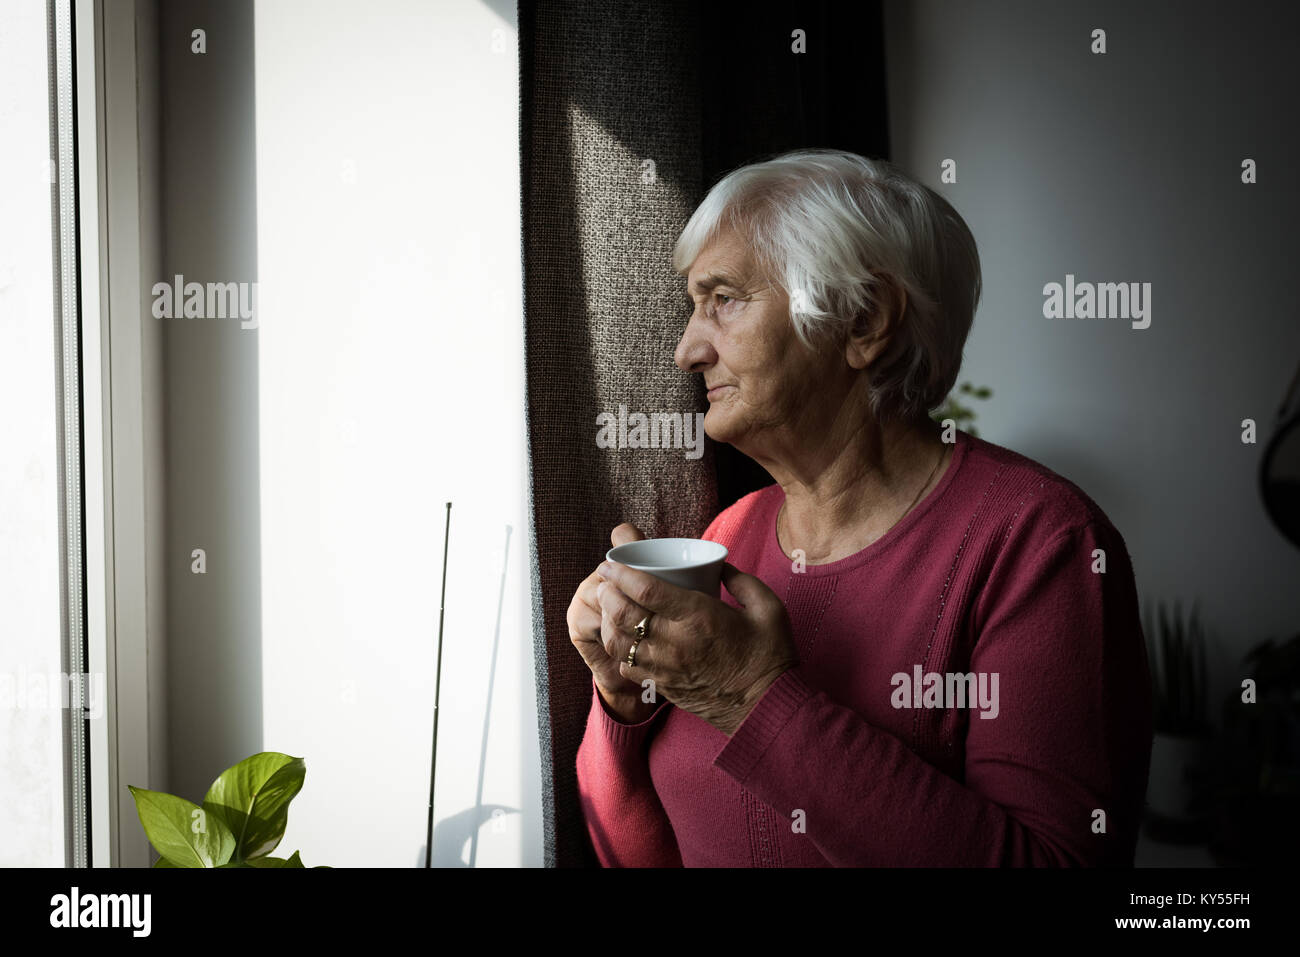 Senior woman having cup of tea while looking out of window Stock Photo